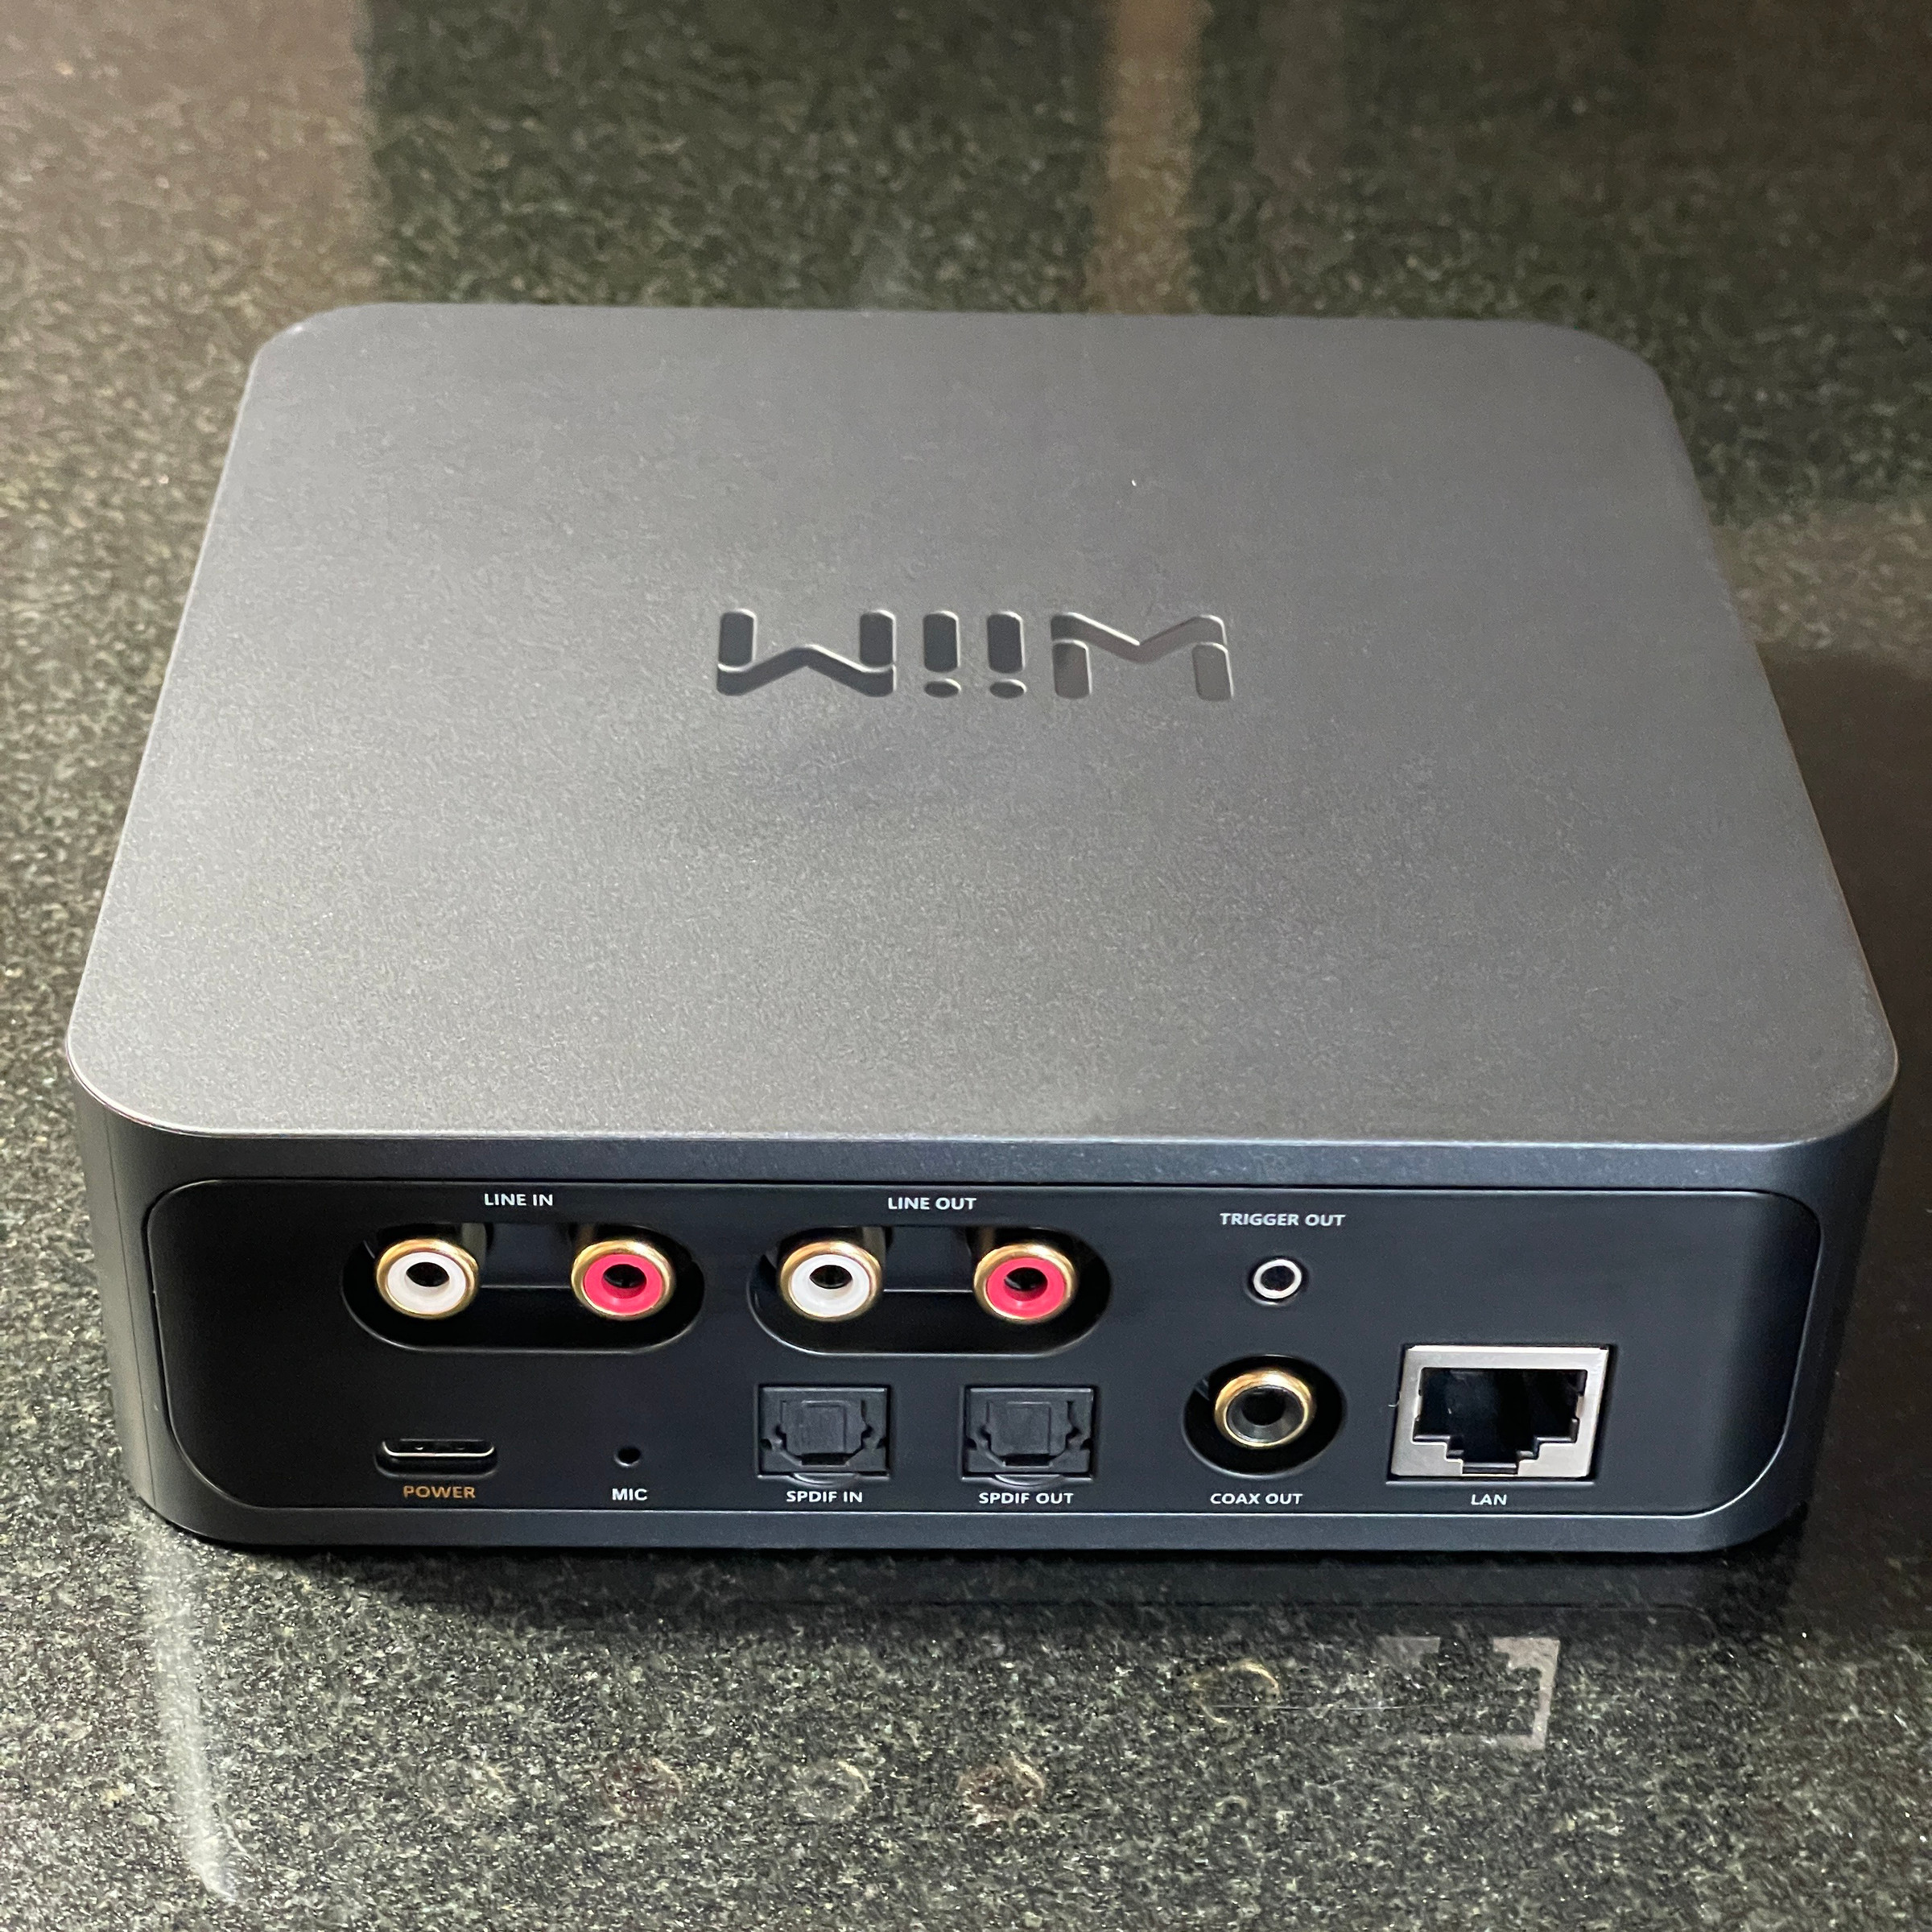 A photo of the rear of a WiiM Pro unit.